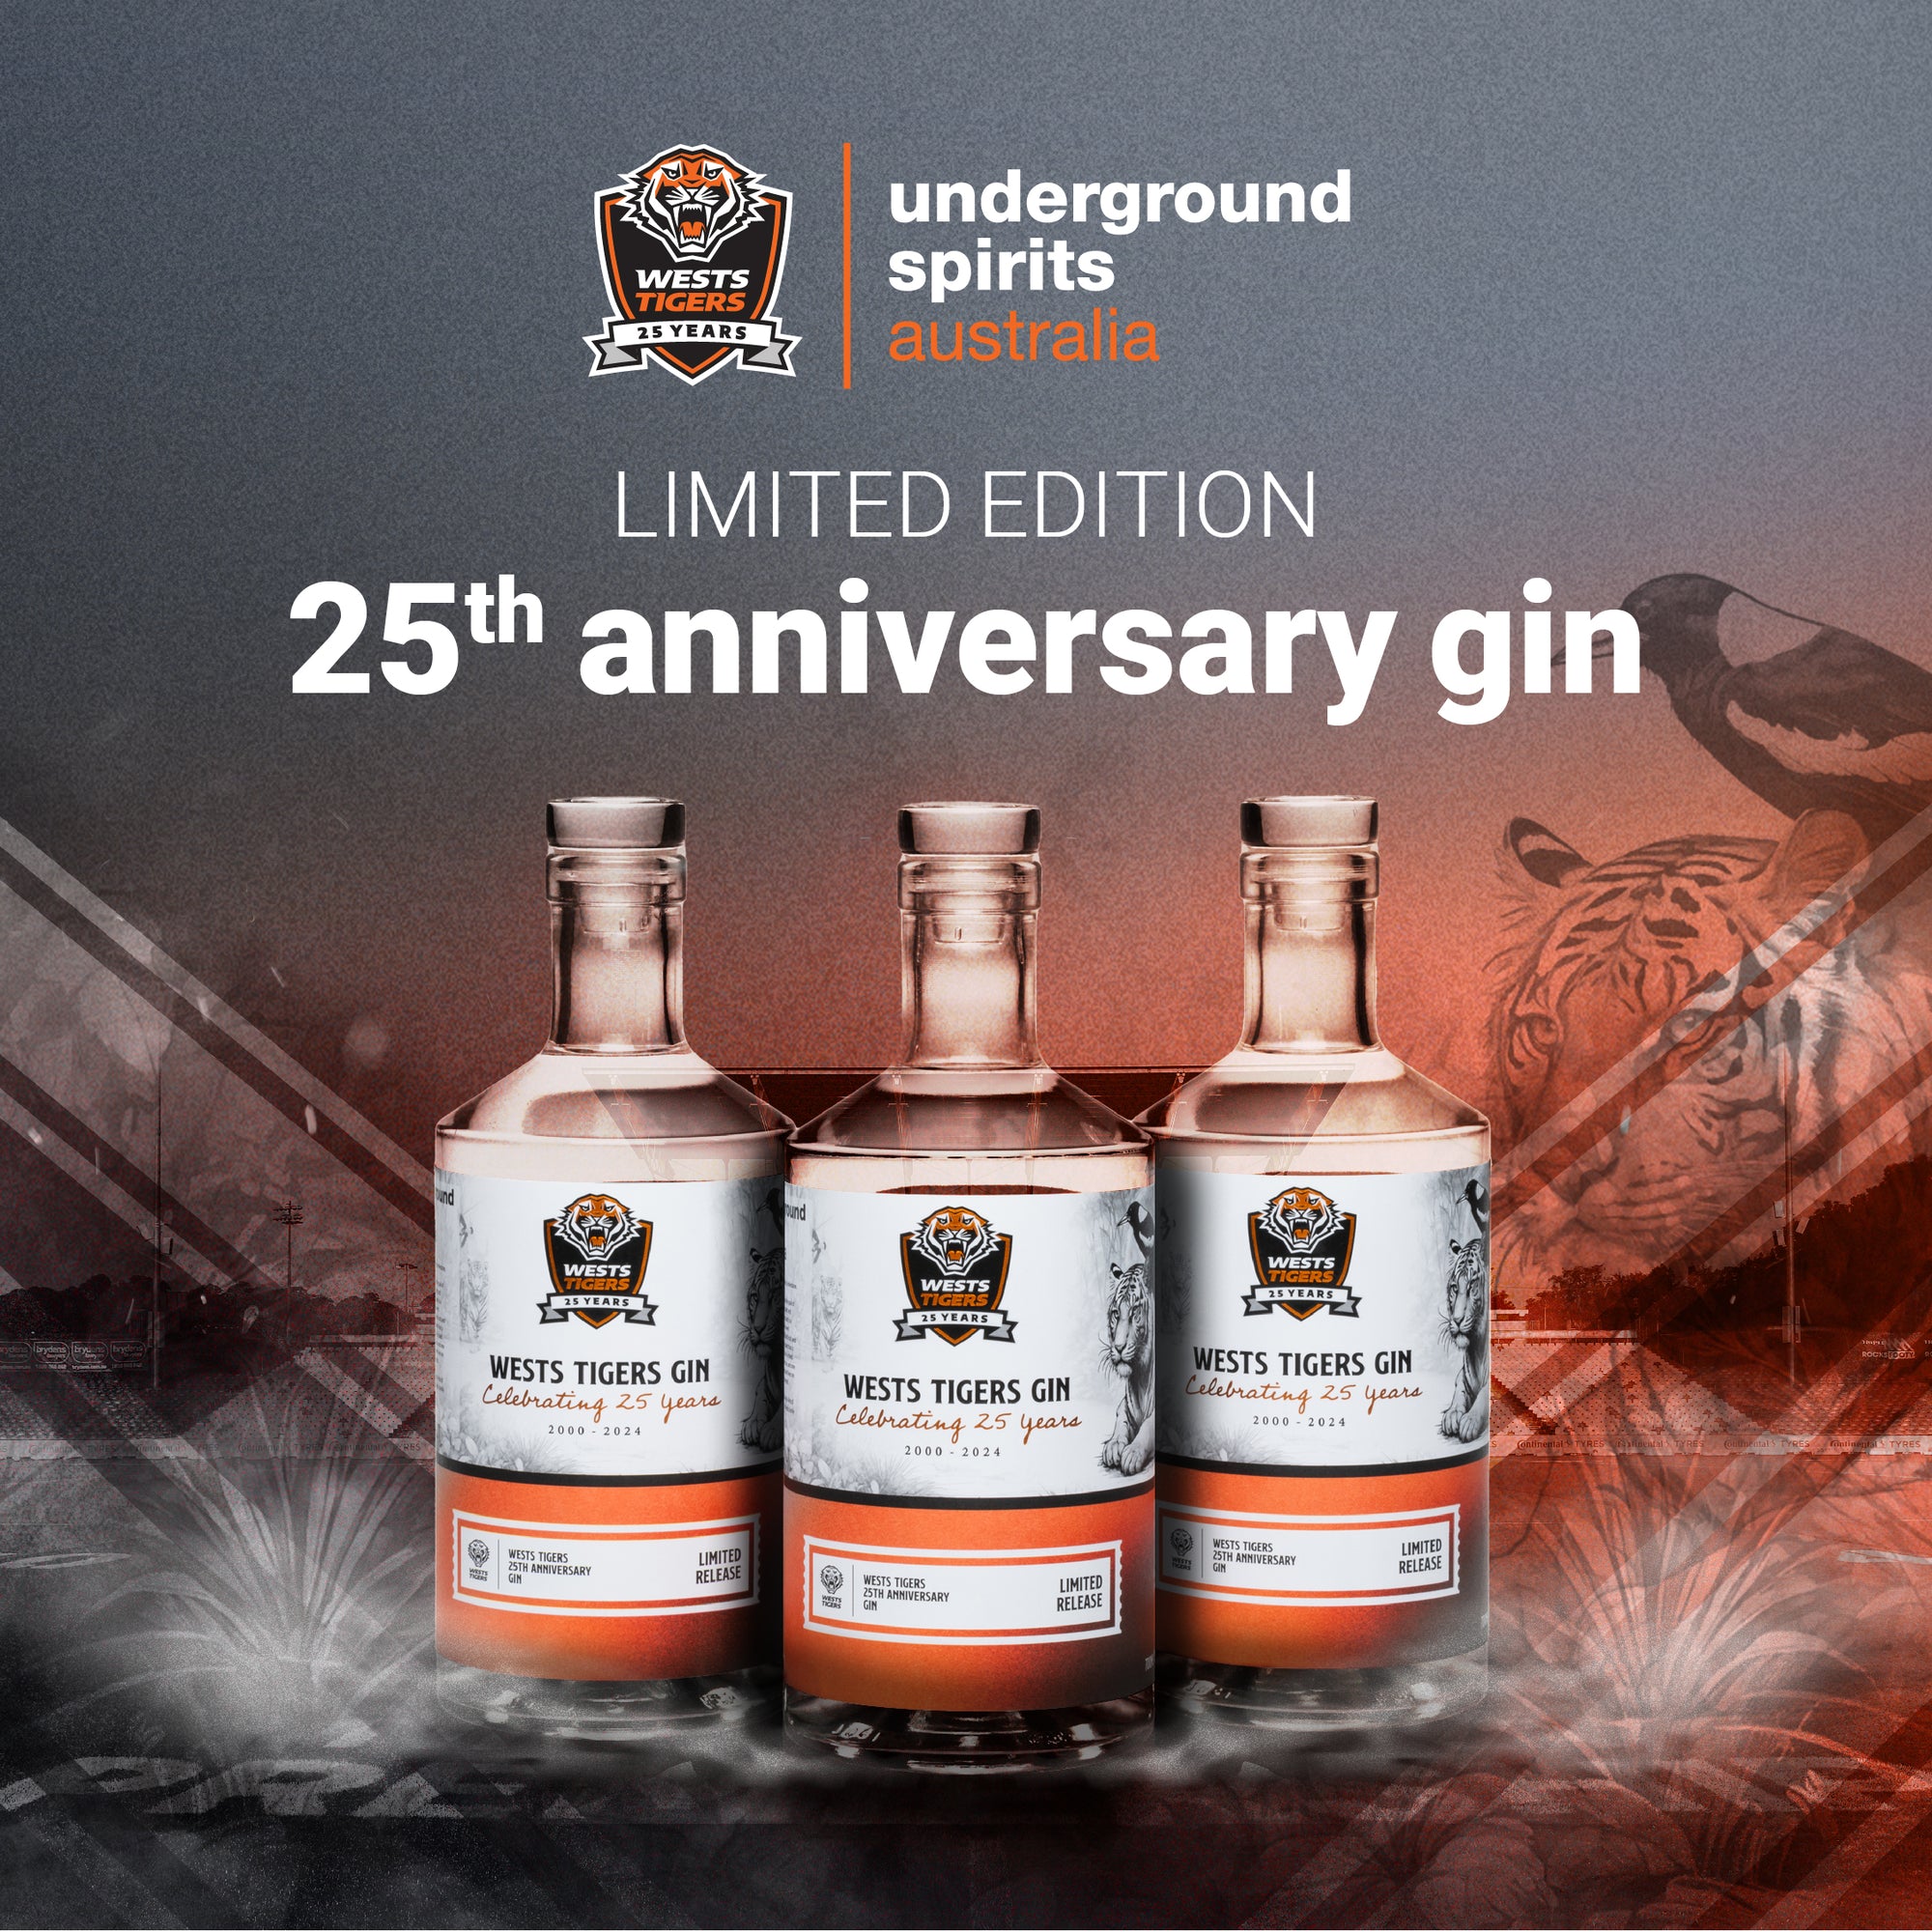 Image of three sleek bottles with black and orange colouring, representing the Wests Tigers' team colours. The bottle contains clear gin and is adorned with a detailed drawing of a tiger with a magpie perched on its head, symbolising the team's emblem and heritage. This unique artwork celebrates the 25th anniversary of the Wests Tigers in the NRL, making the bottle a special collector's item and a tribute to the team's enduring spirit and triumphs